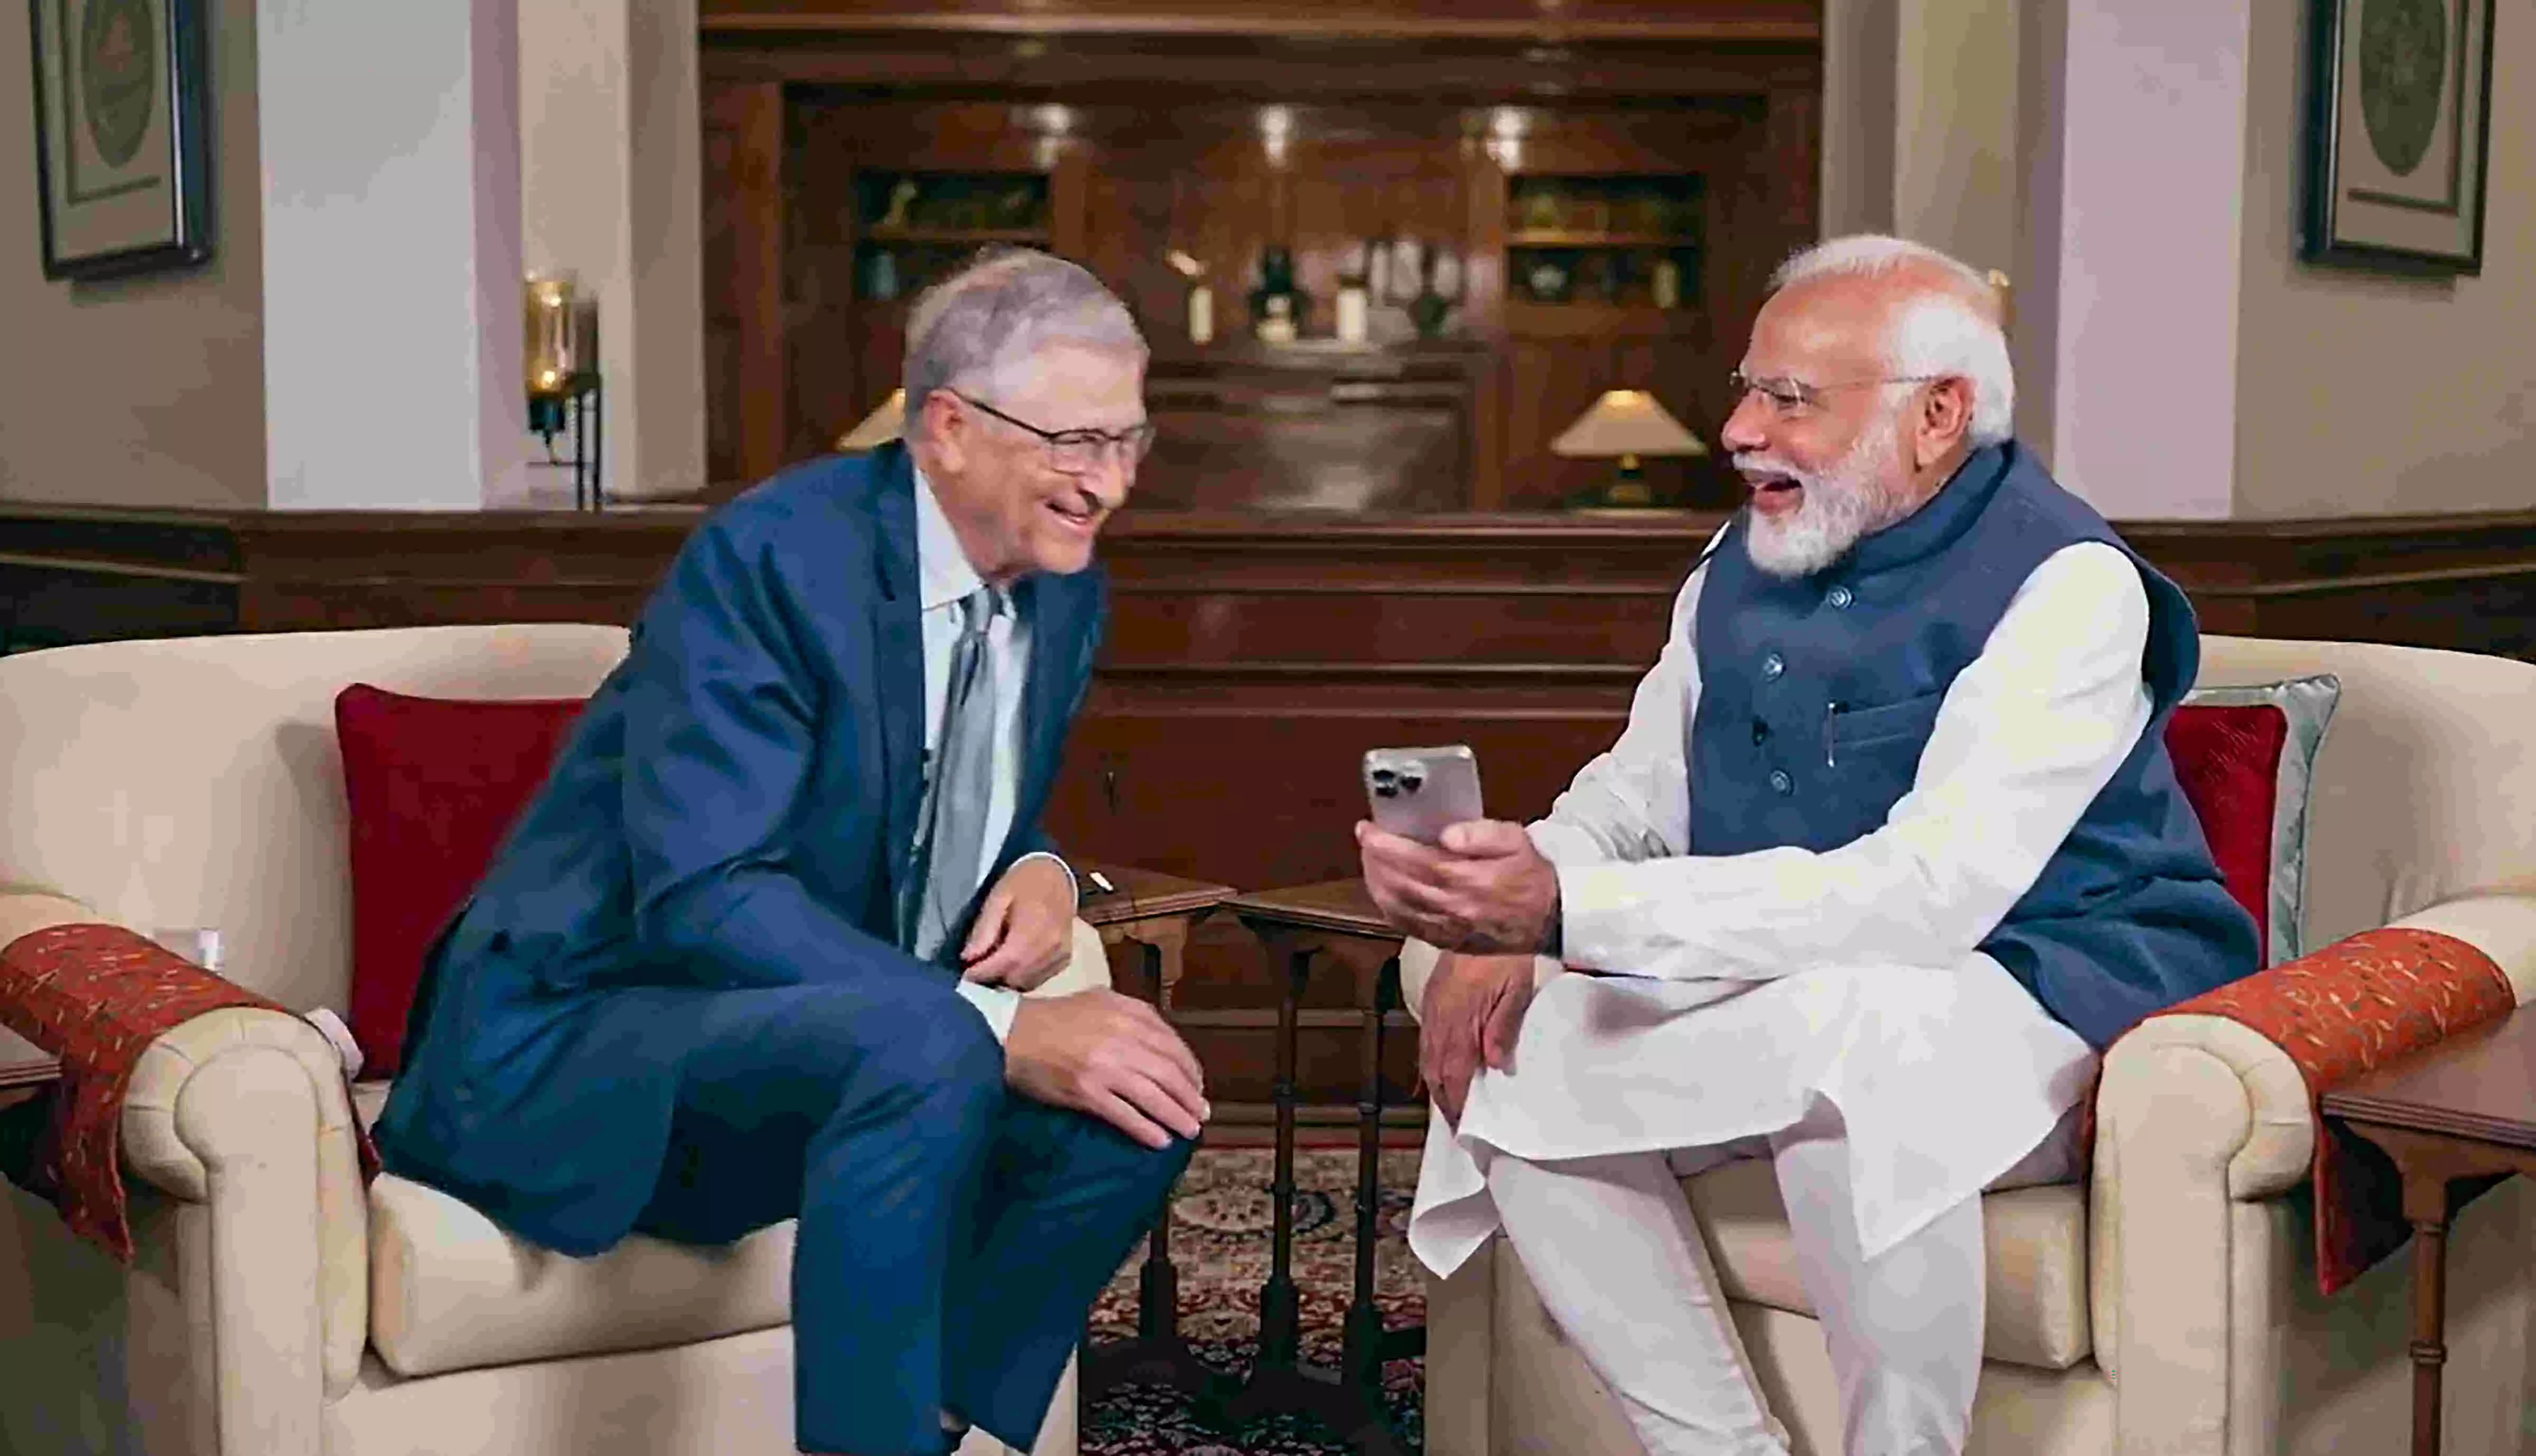 My priority will be to invest in local research to safeguard daughters lives: PM Modi to Bill Gates